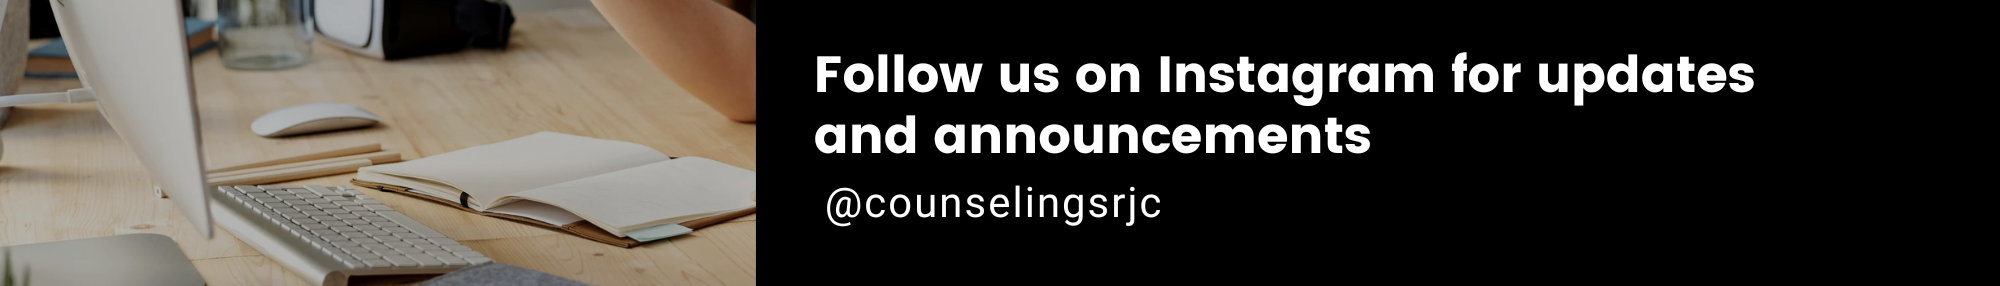 Follow us on instagram at counseling srjc